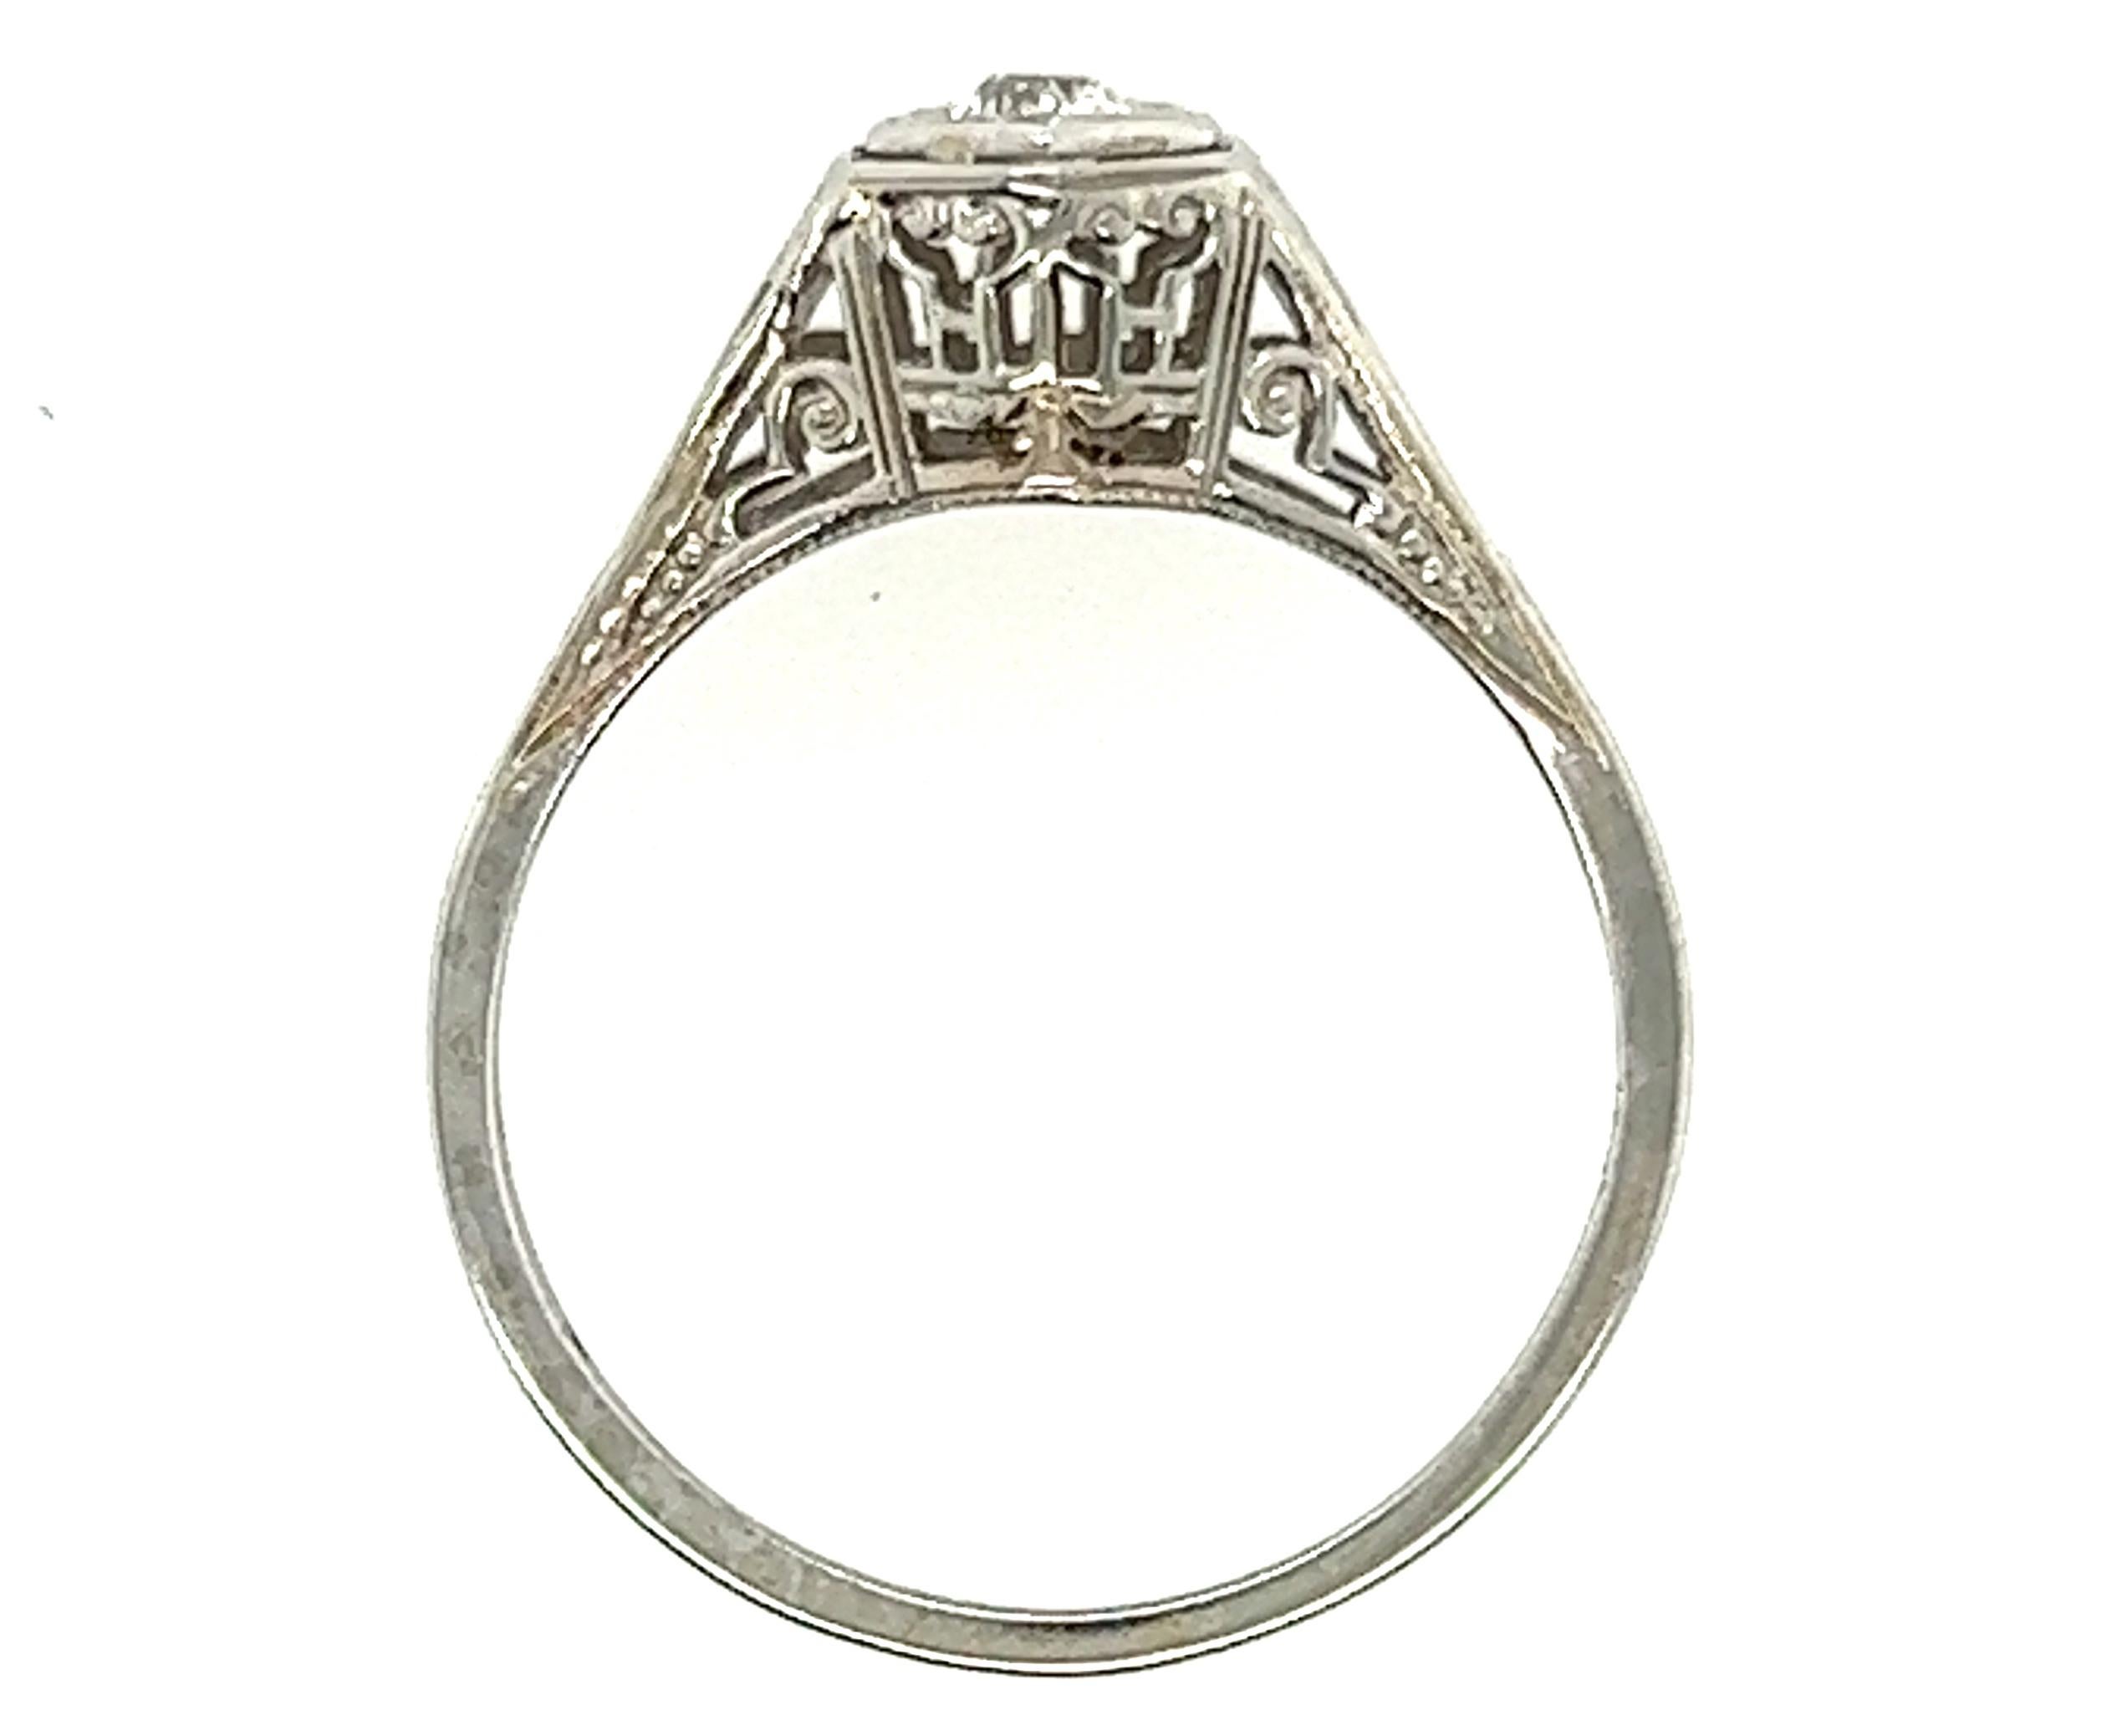 Genuine Original Antique from 1920's Solitaire Engagement Ring .10ct Old European Cut Diamond 18K White Gold 


Featuring an Amazing .10ct  F/VS Natural Mined Old European Cut Diamond

Belais Brothers Ring, First Jewelers in the Industry to Craft